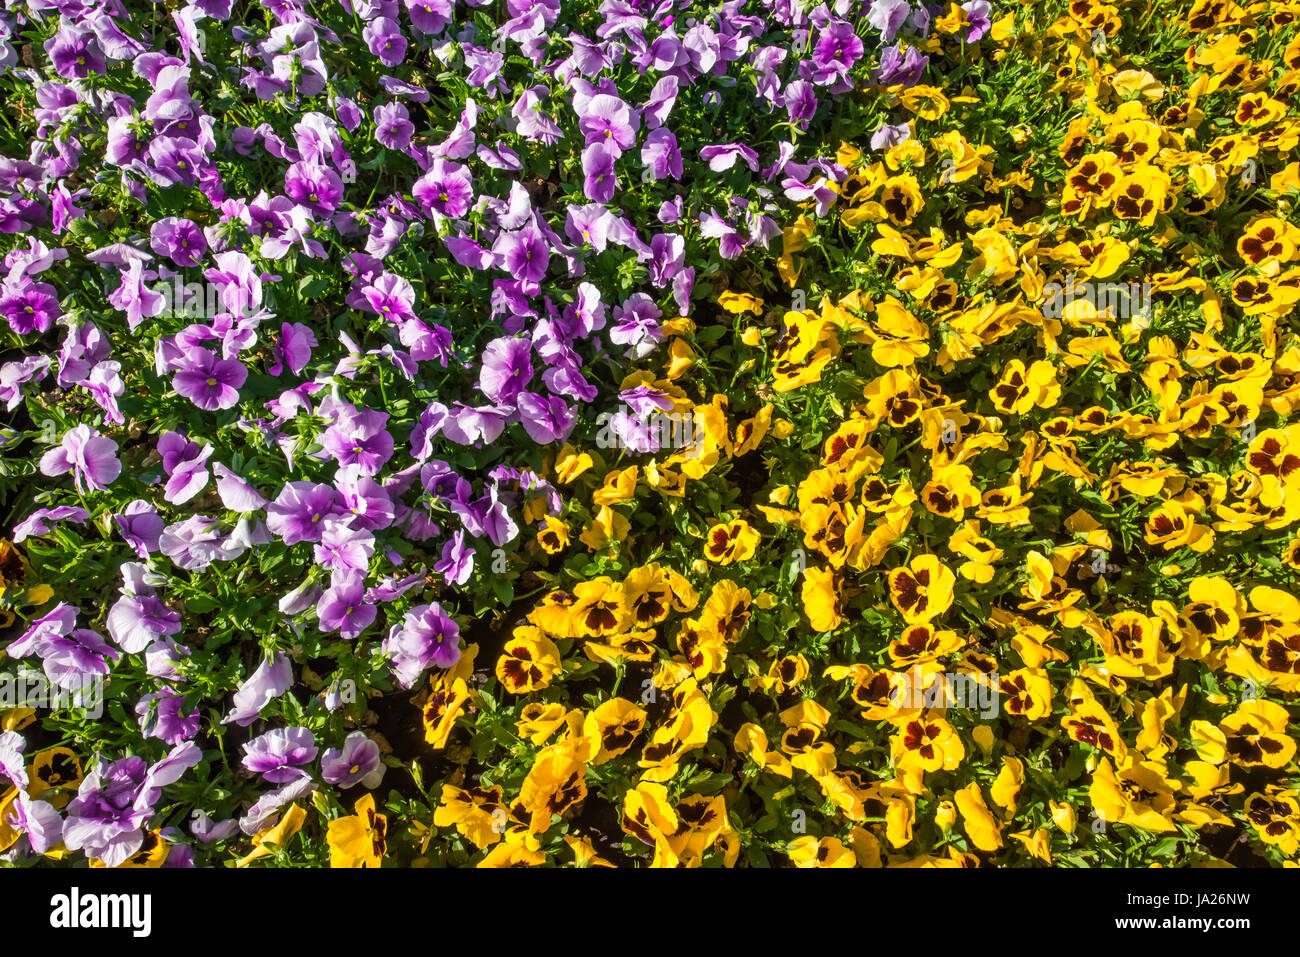 Colorful flowerbed made of pink and yellow pansies in sunshine Stock Photo